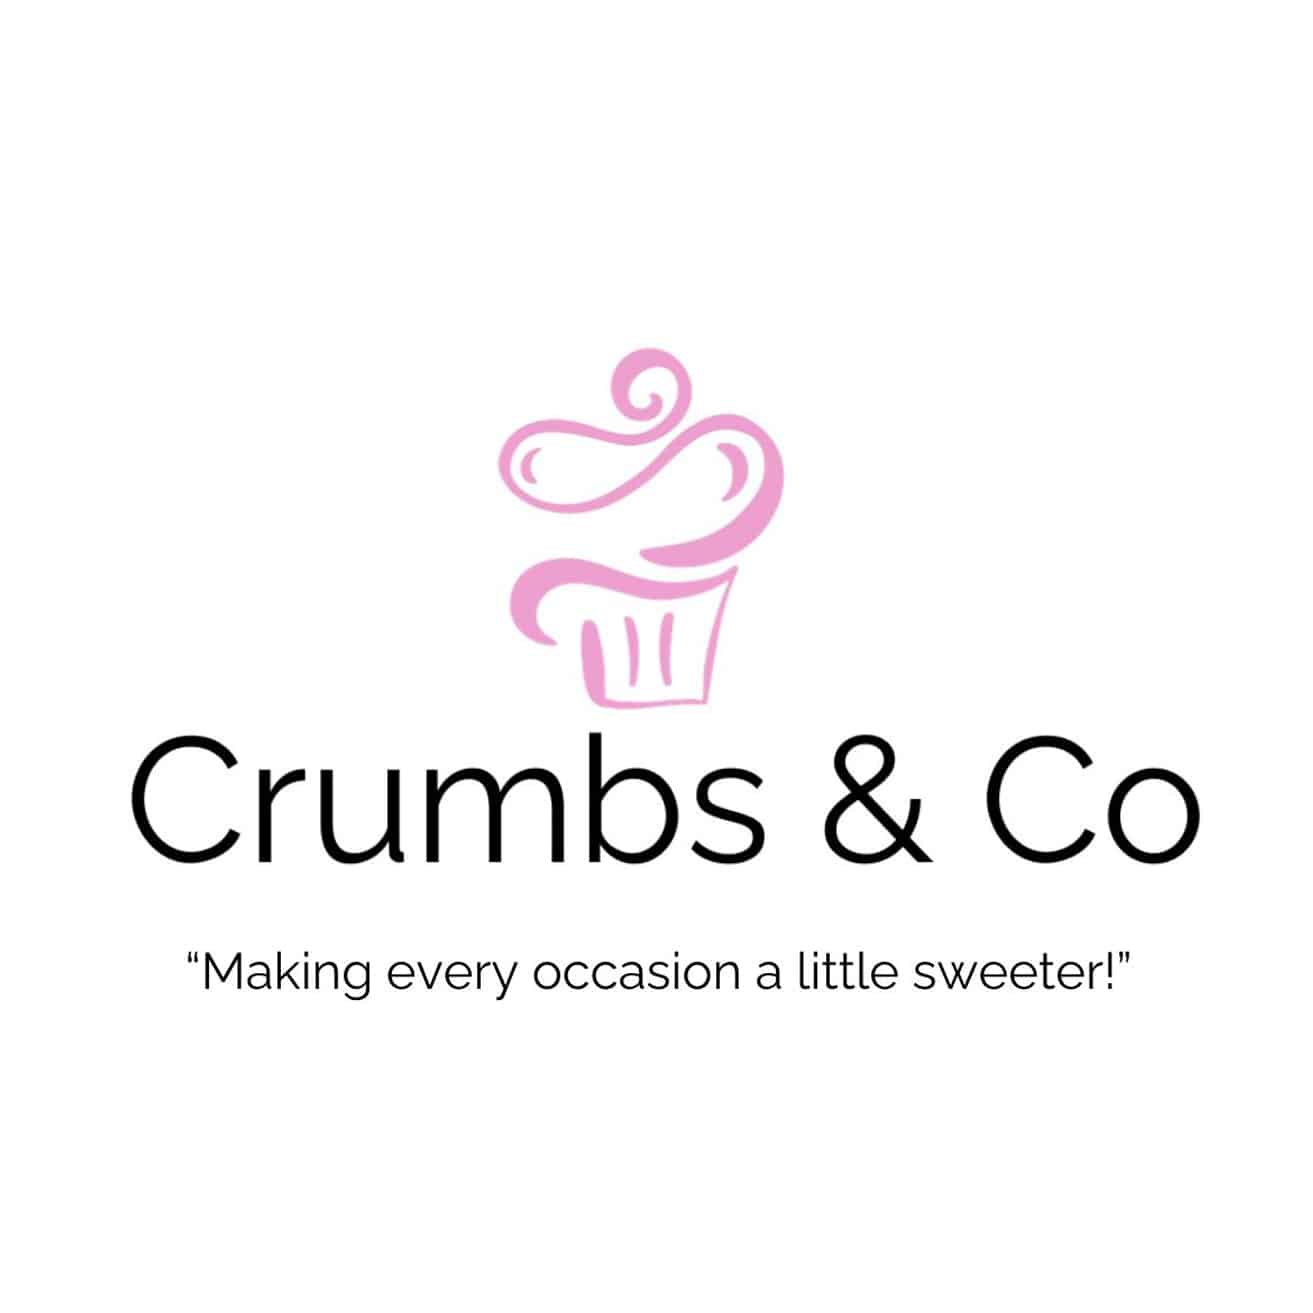 Crumbs & Co, Making every occasion a little sweeter!